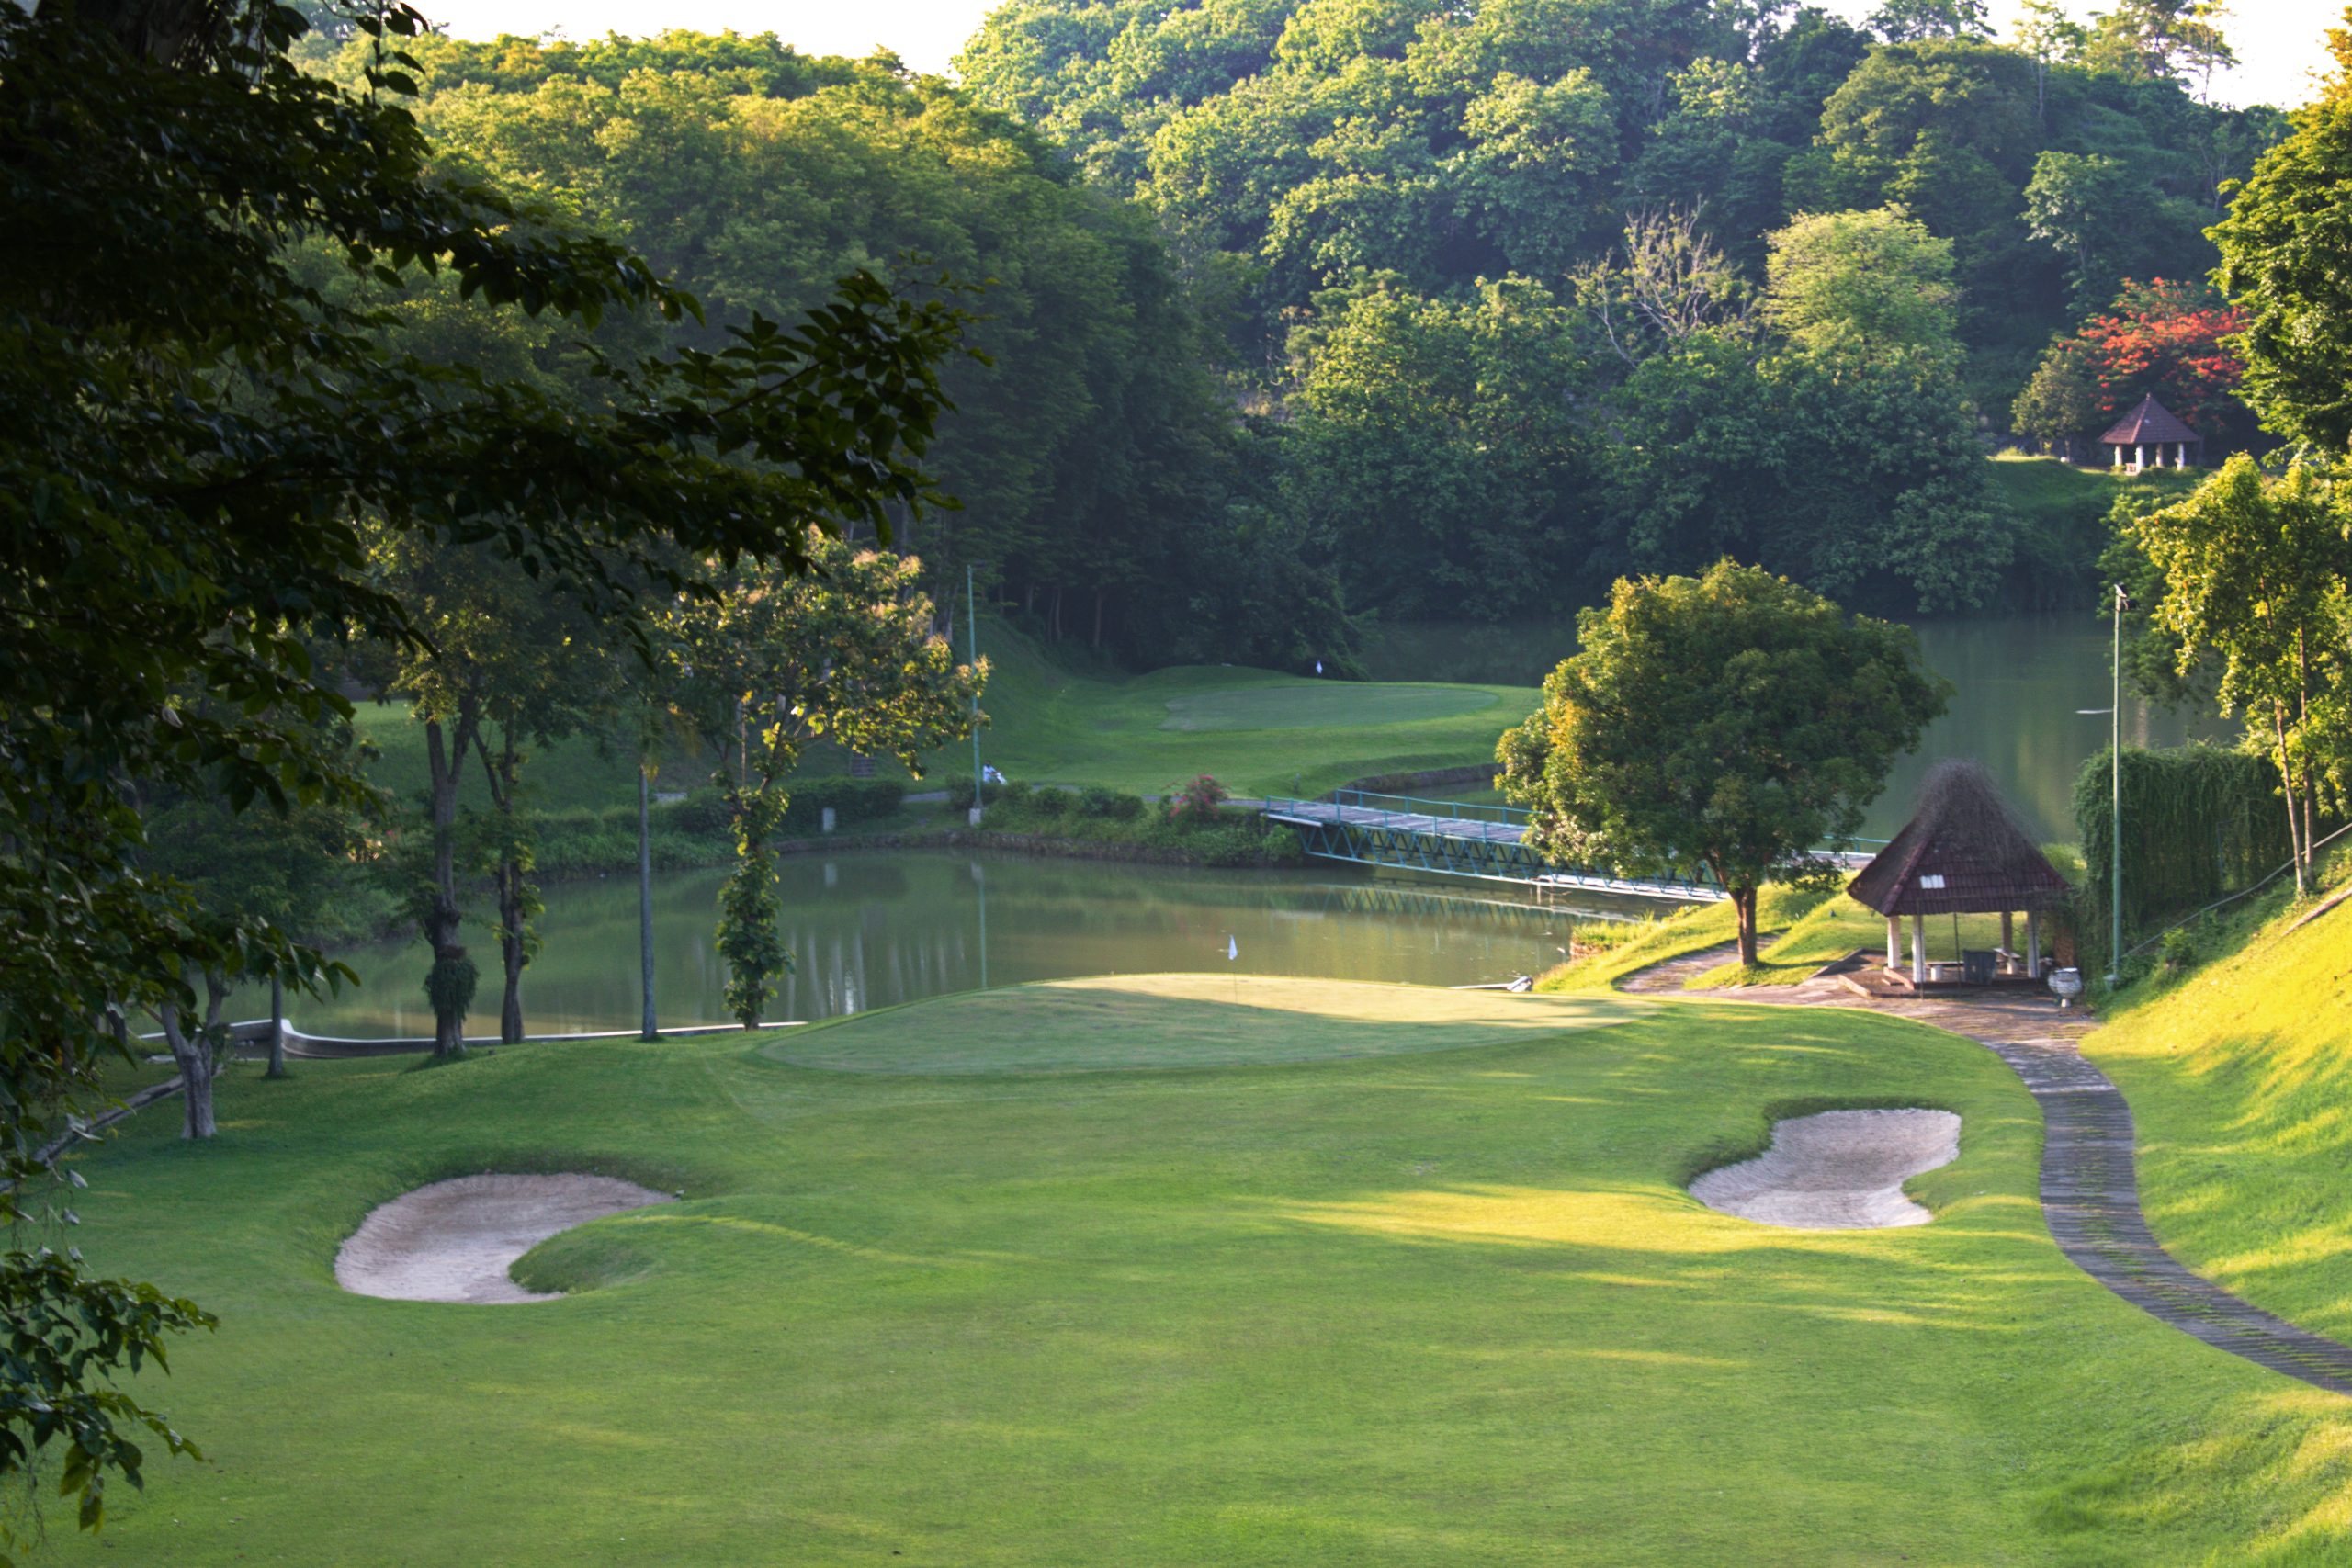 Candigolf Semarang: Established from Time to Time